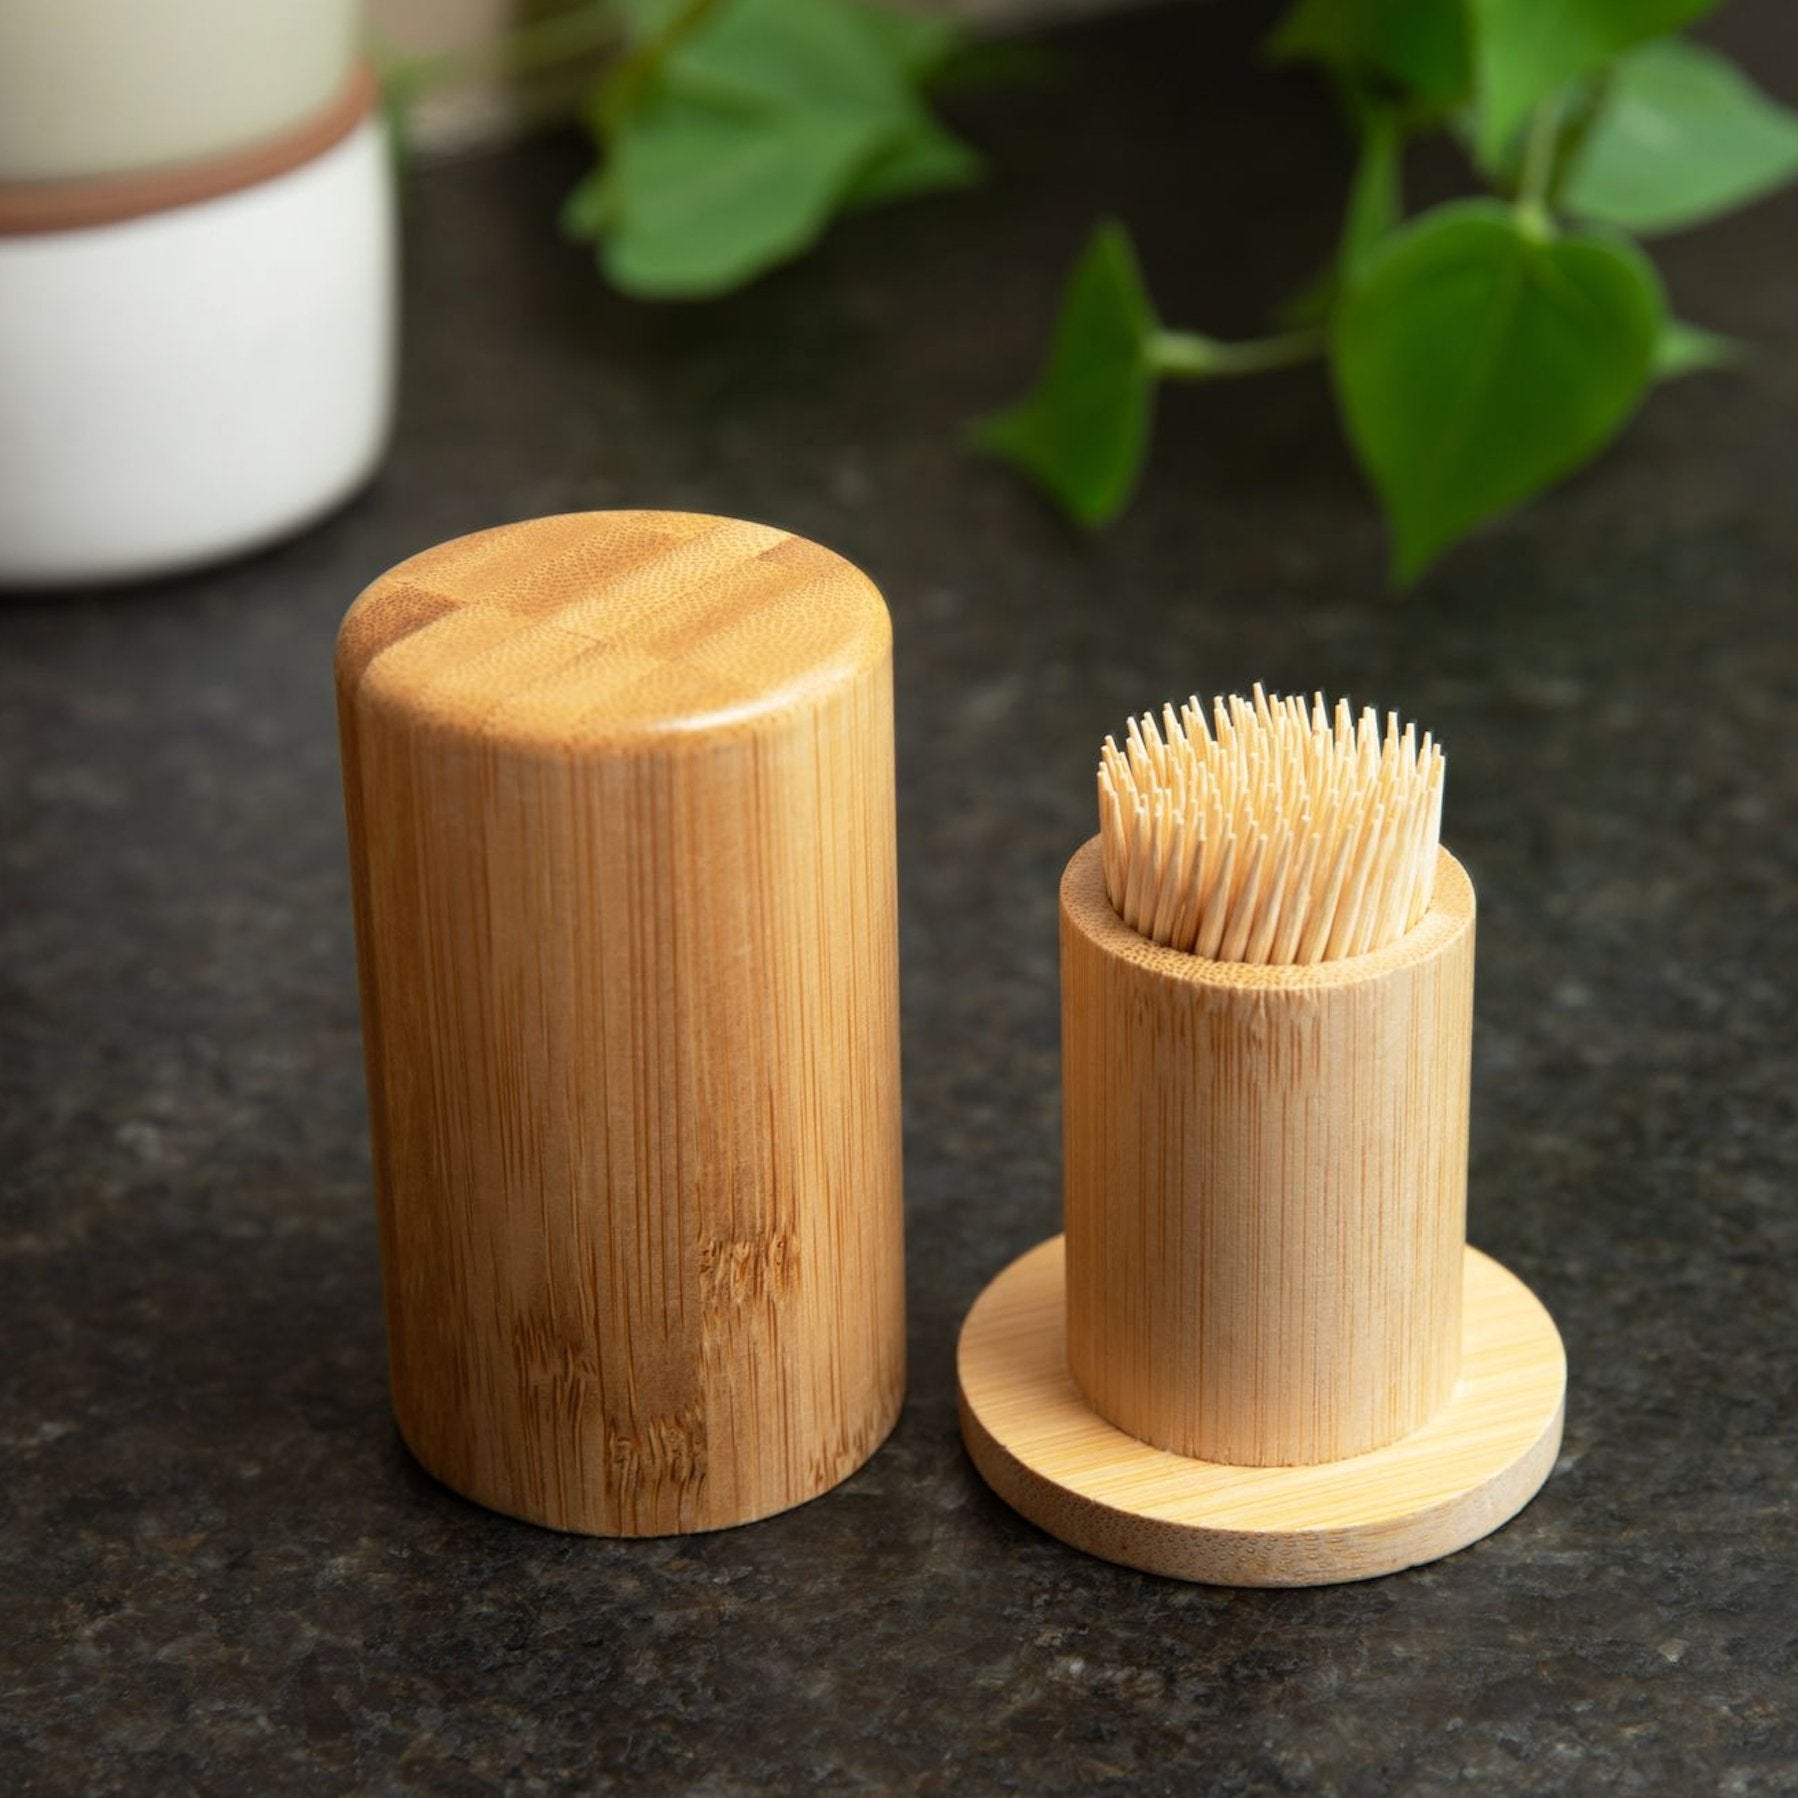 sustainable, zero waste, earth-friendly, plastic-free Bamboo Toothpick Holder - Bamboo Switch